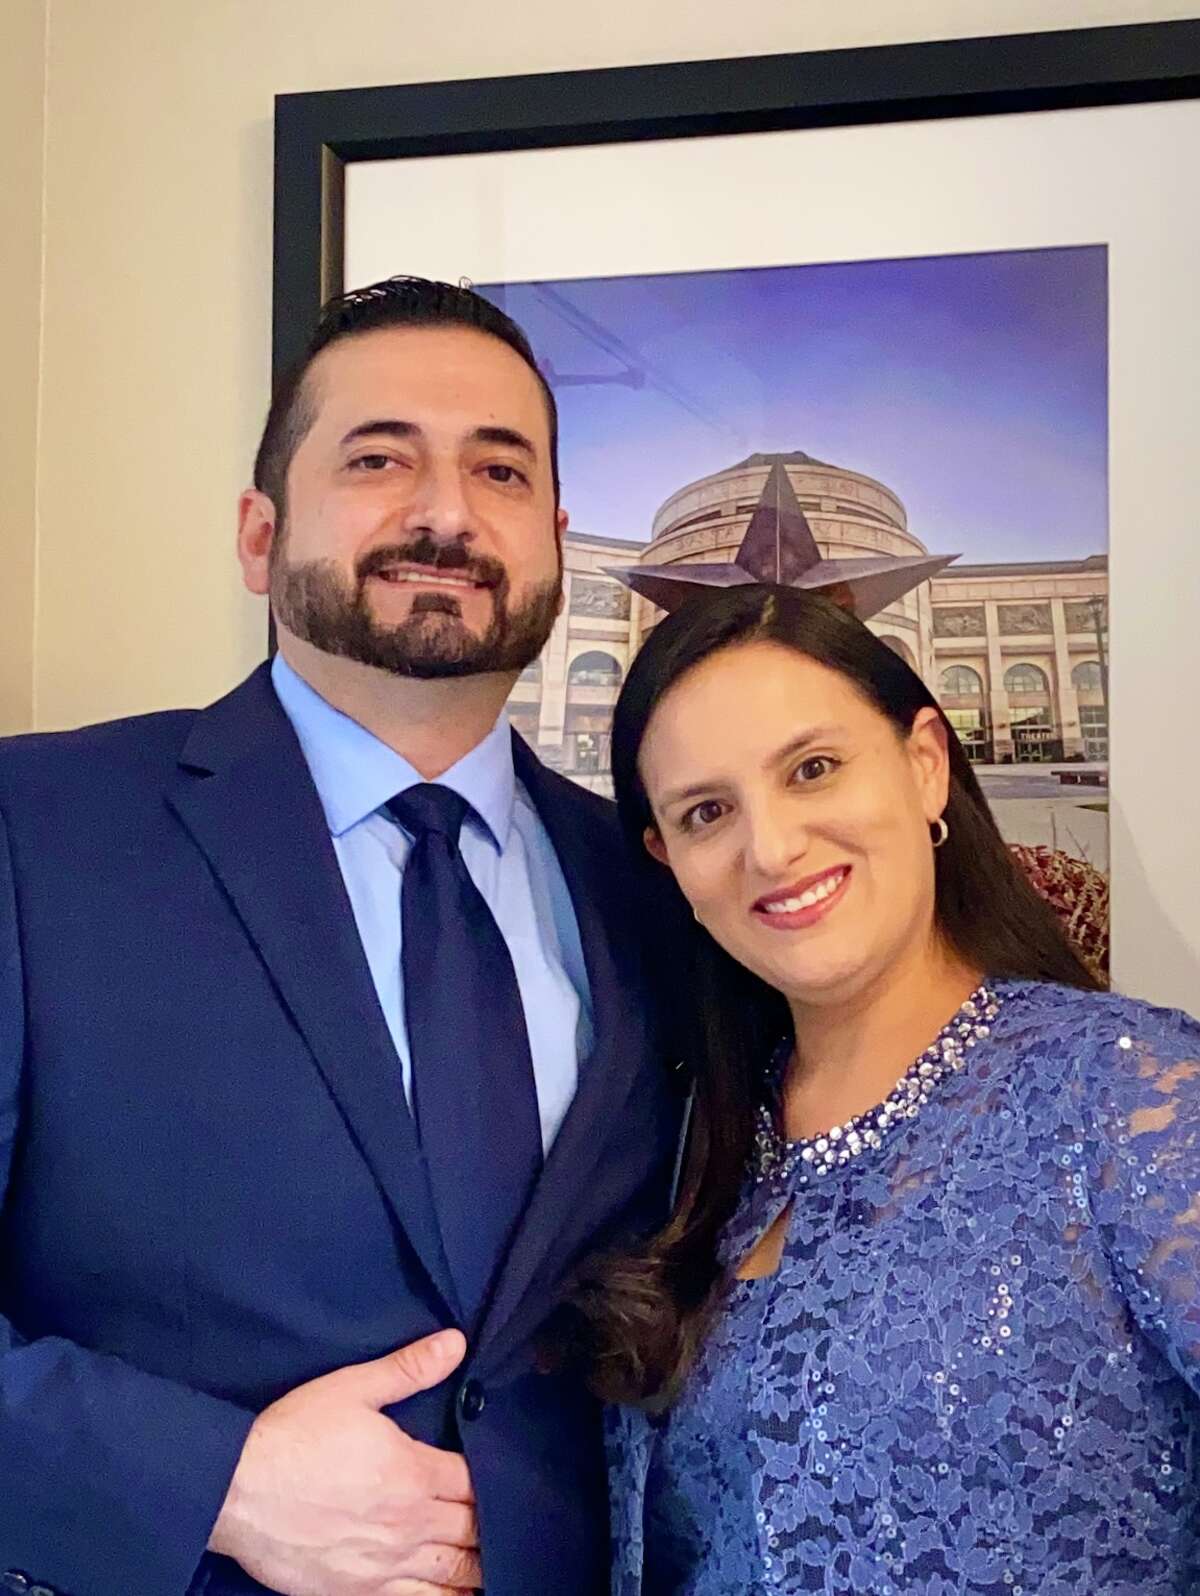 LISD administrators who are husband and wife, Lamar Middle School Principal, Dr. Eduardo E. Lopez, and Sabas Perez Early College High School Director Dr. Rocio Lopez, earned their Doctorate in Education in Curriculum and Instruction from Liberty University in August.